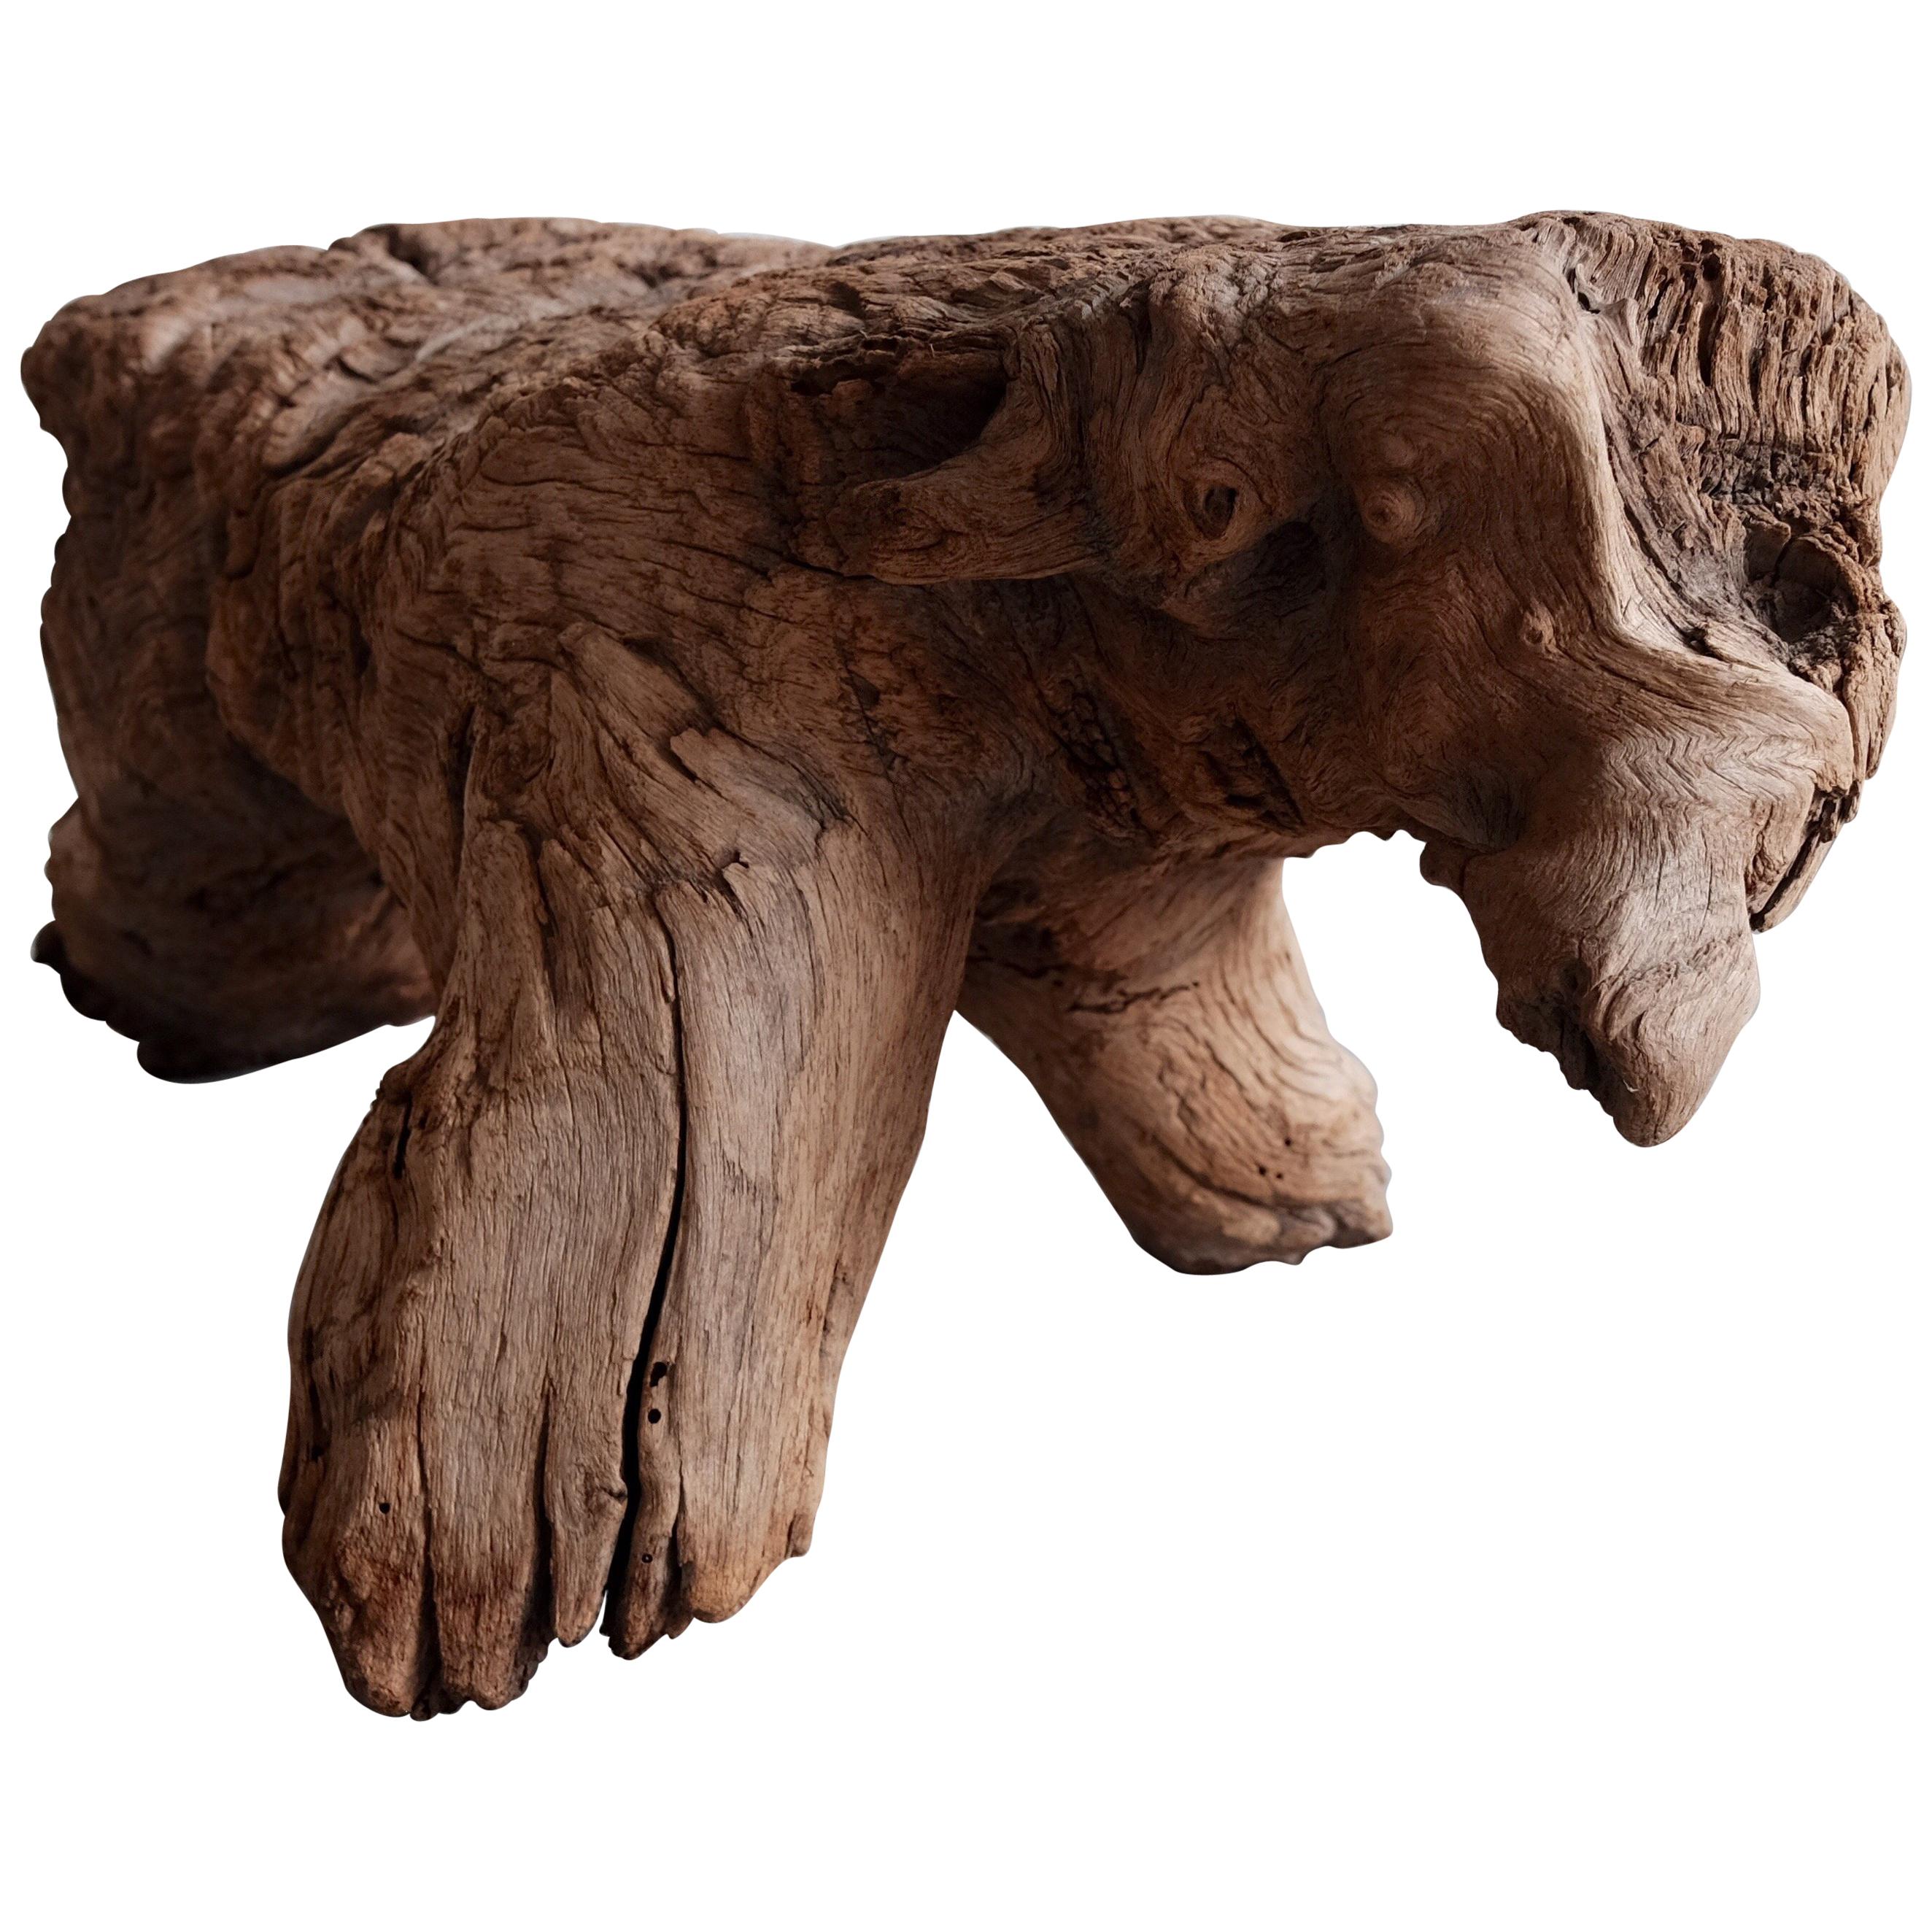 Wooden "Dog" Stool from Mexico